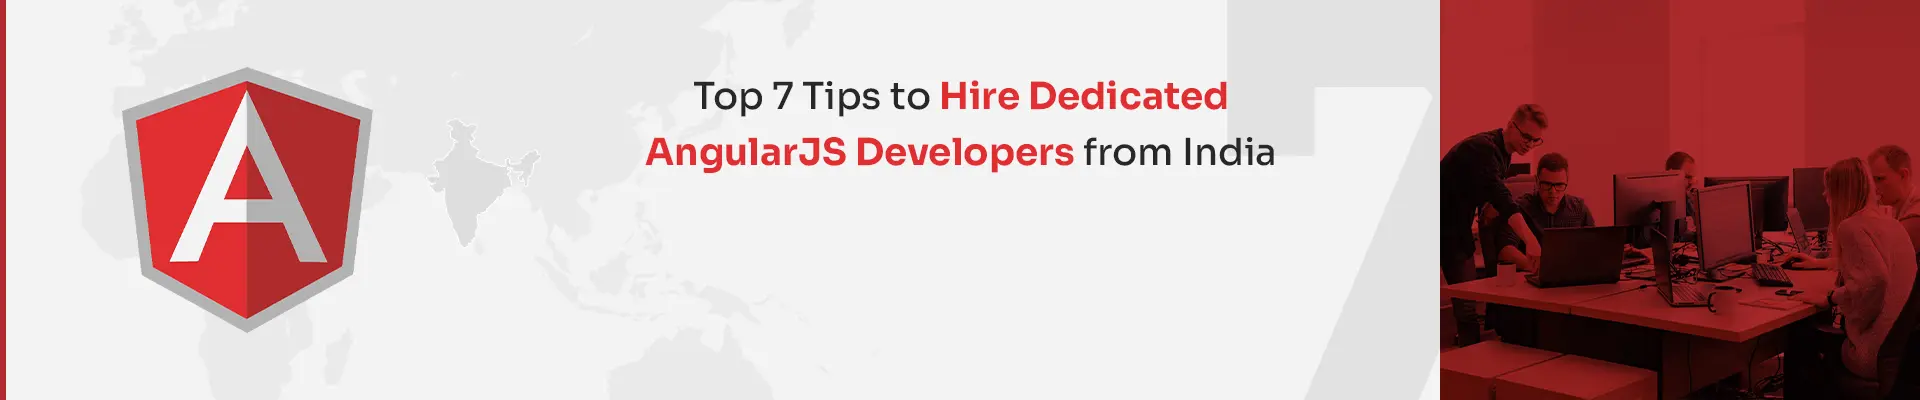 Top Tips to Hire Dedicated AngularJS Developers from India